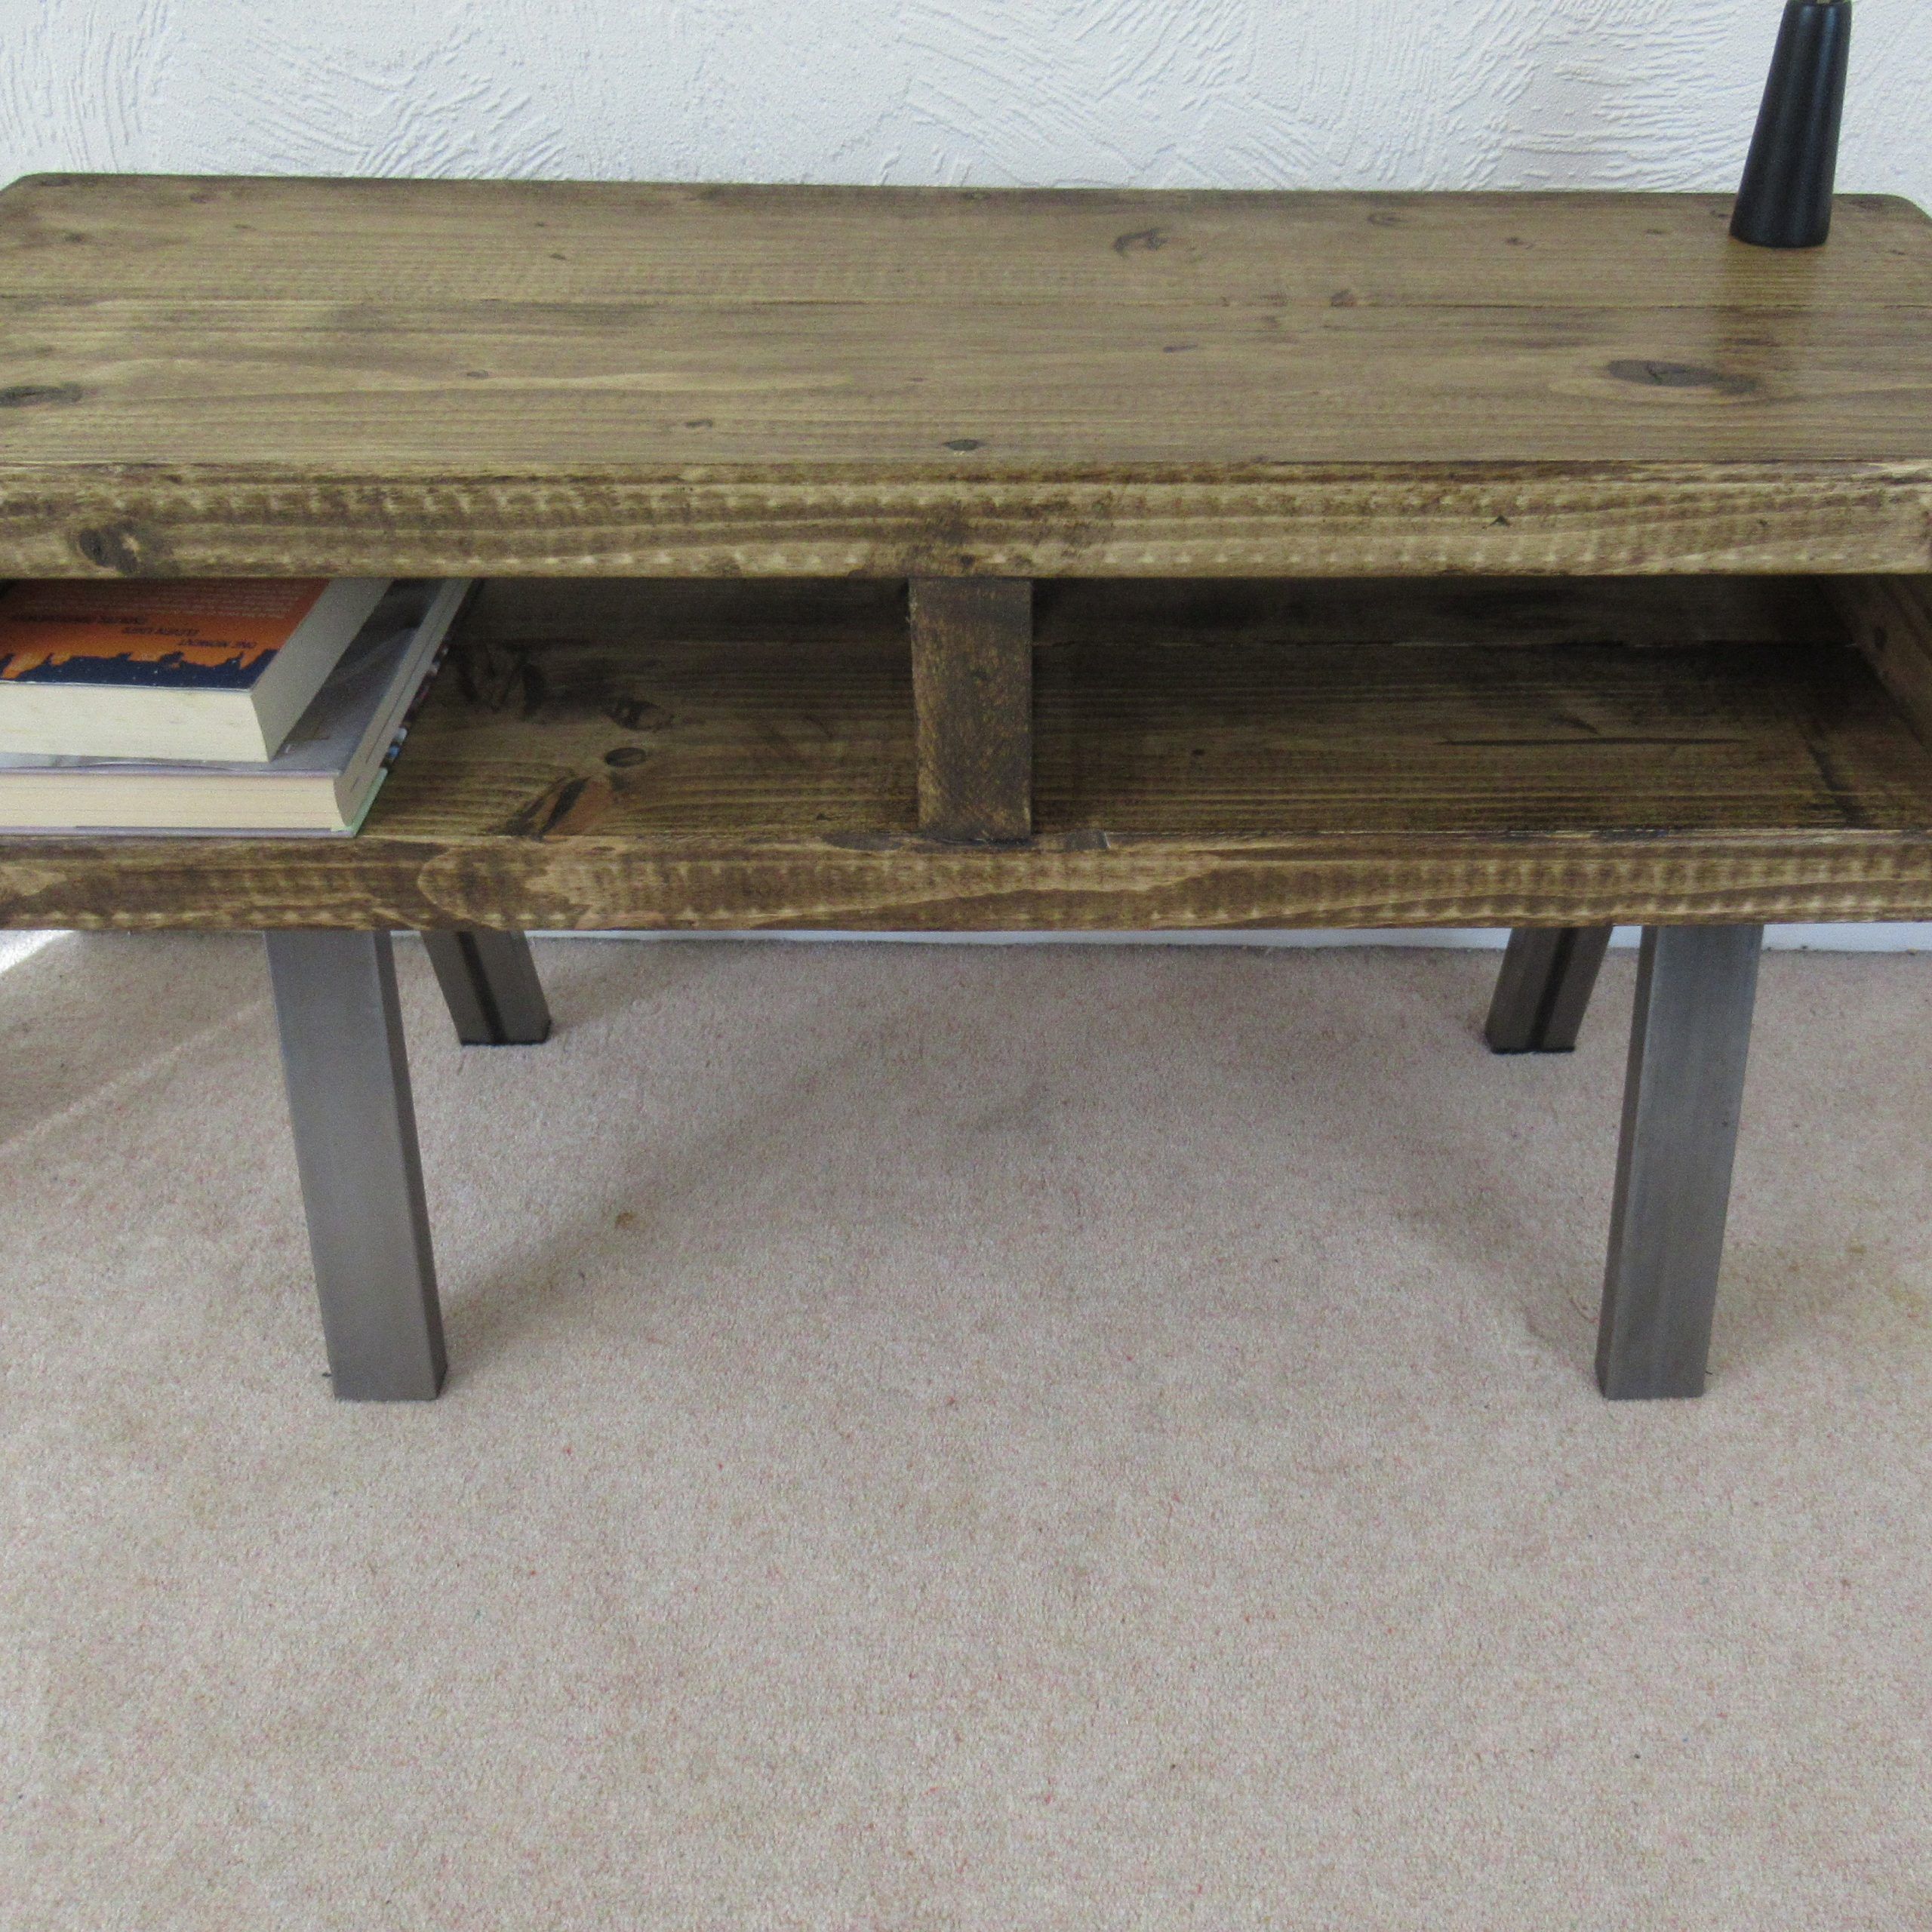 Tall Tv Stand Rustic Wood Pertaining To Rustic Red Tv Stands (View 14 of 15)